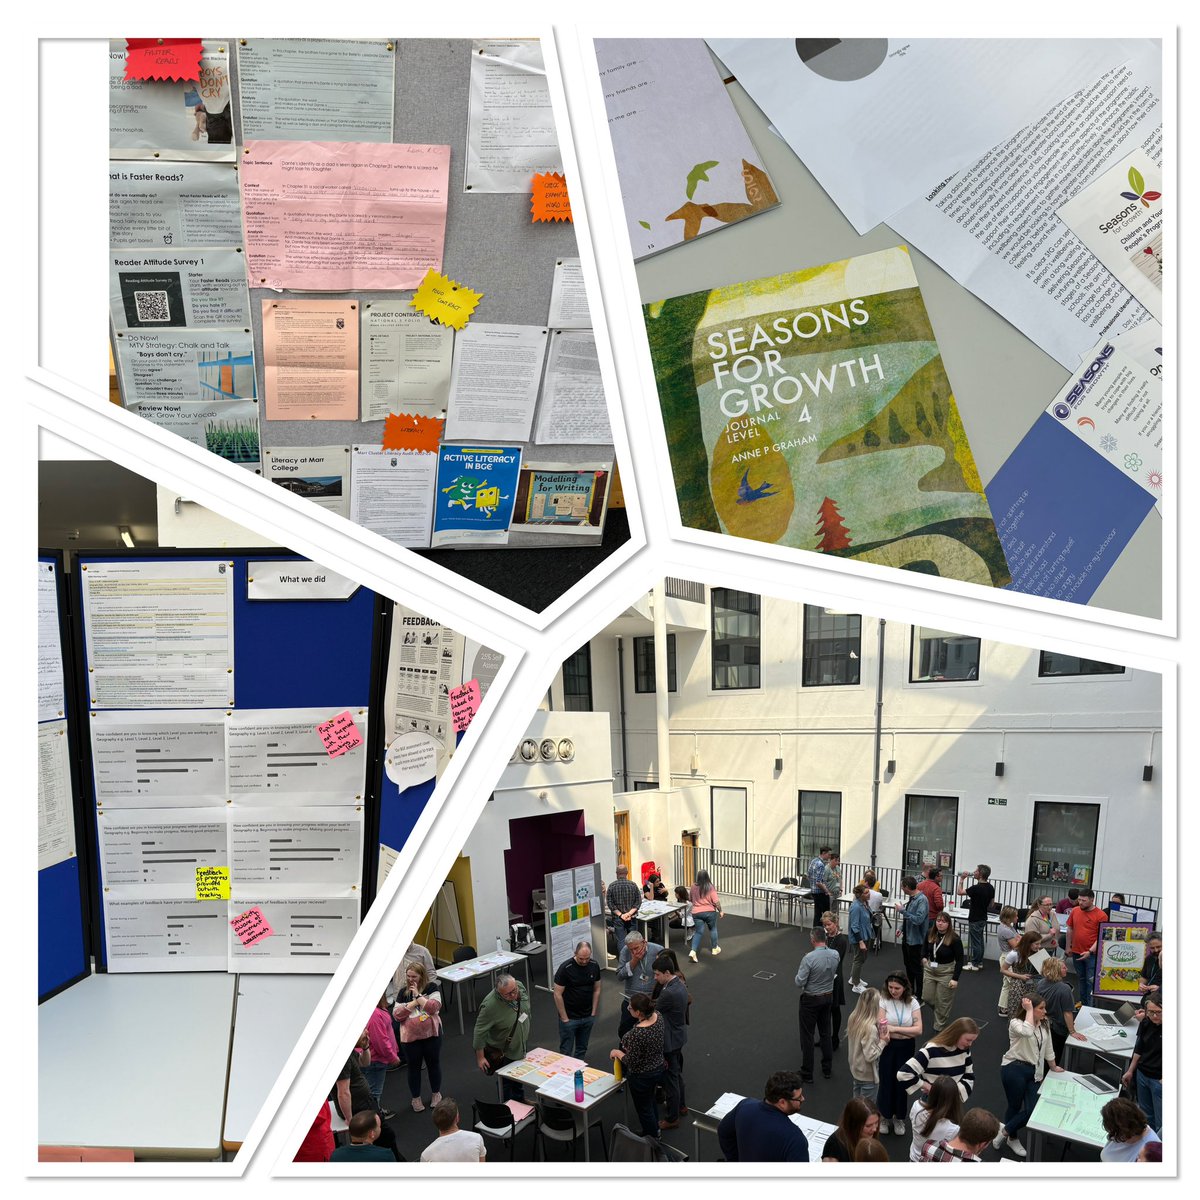 Truly inspiring day with staff sharing their practitioner enquiry journey during a showcase afternoon. Great to hear how research informed practice. Also learned more about adaptive teaching and planned peer learning visits focusing on retrieval and plenaries #collaboration